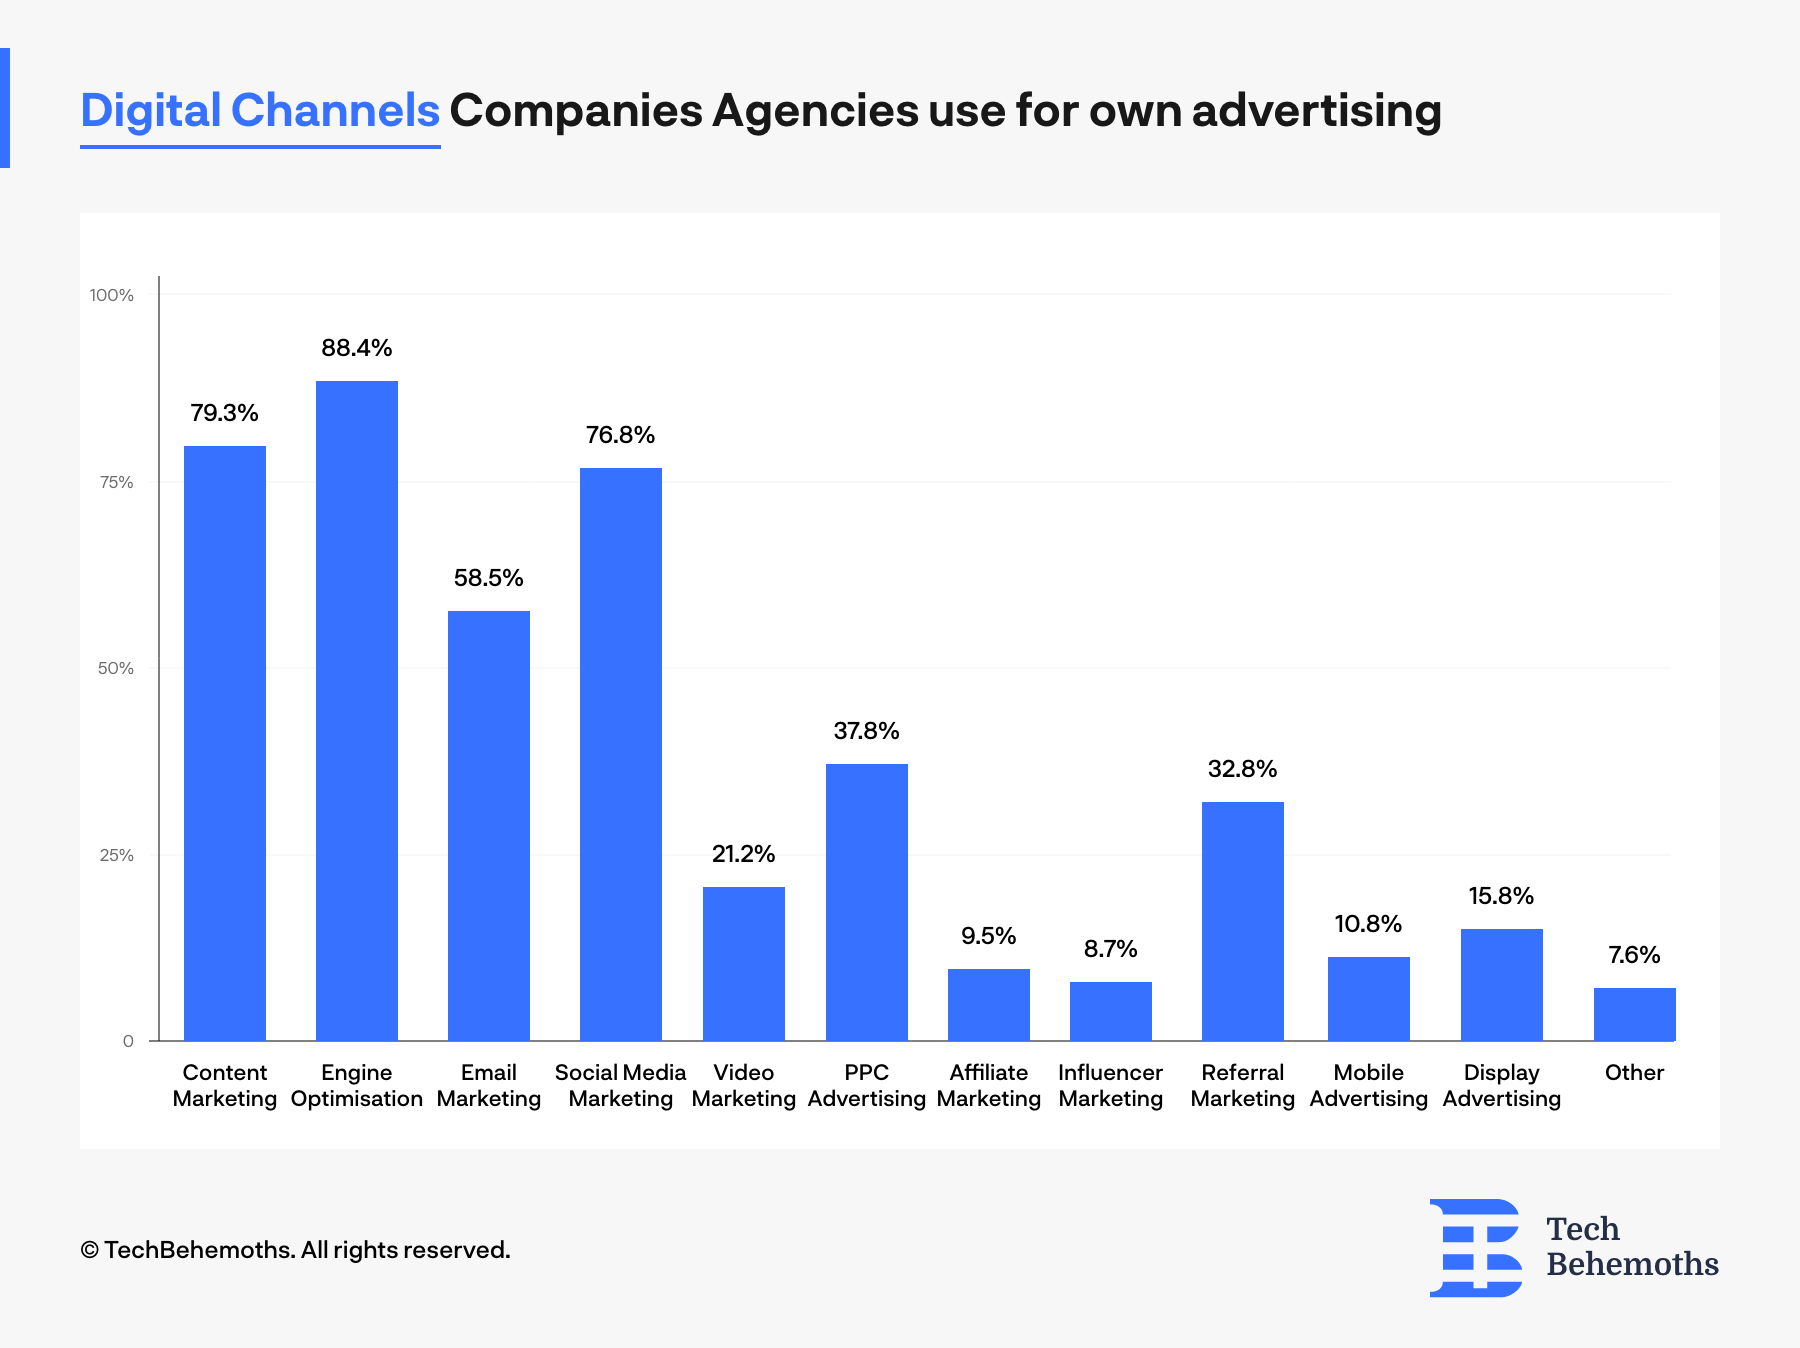 Digital channels IT companies and digital agencies use for self-advertising